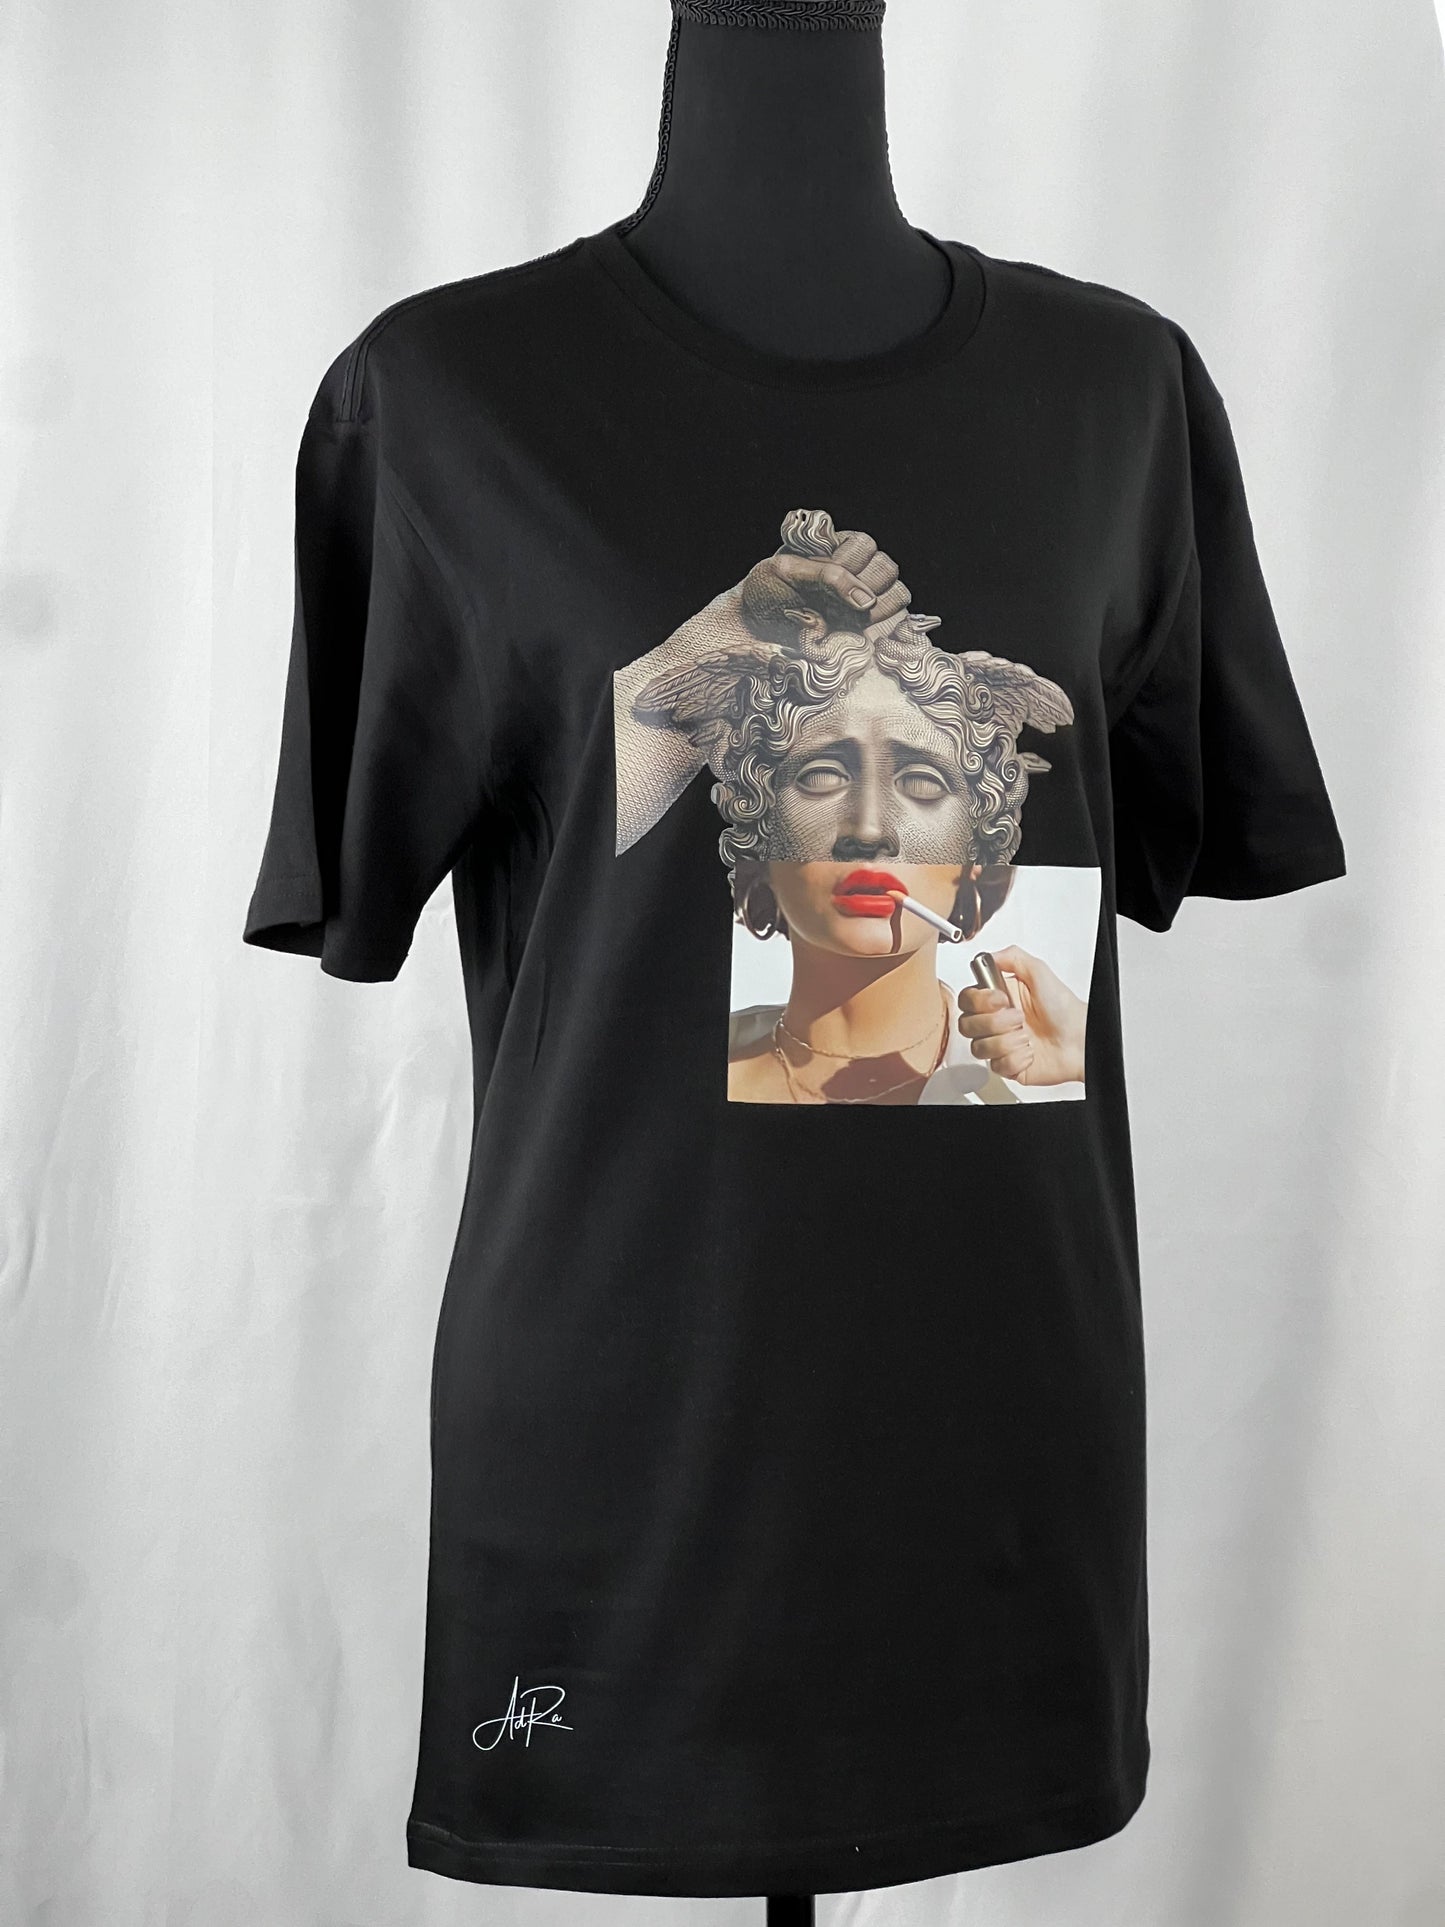 Make a Statement with Our Women's Smoking Lips Statue Graphic T-Shirt | Adra Apparel